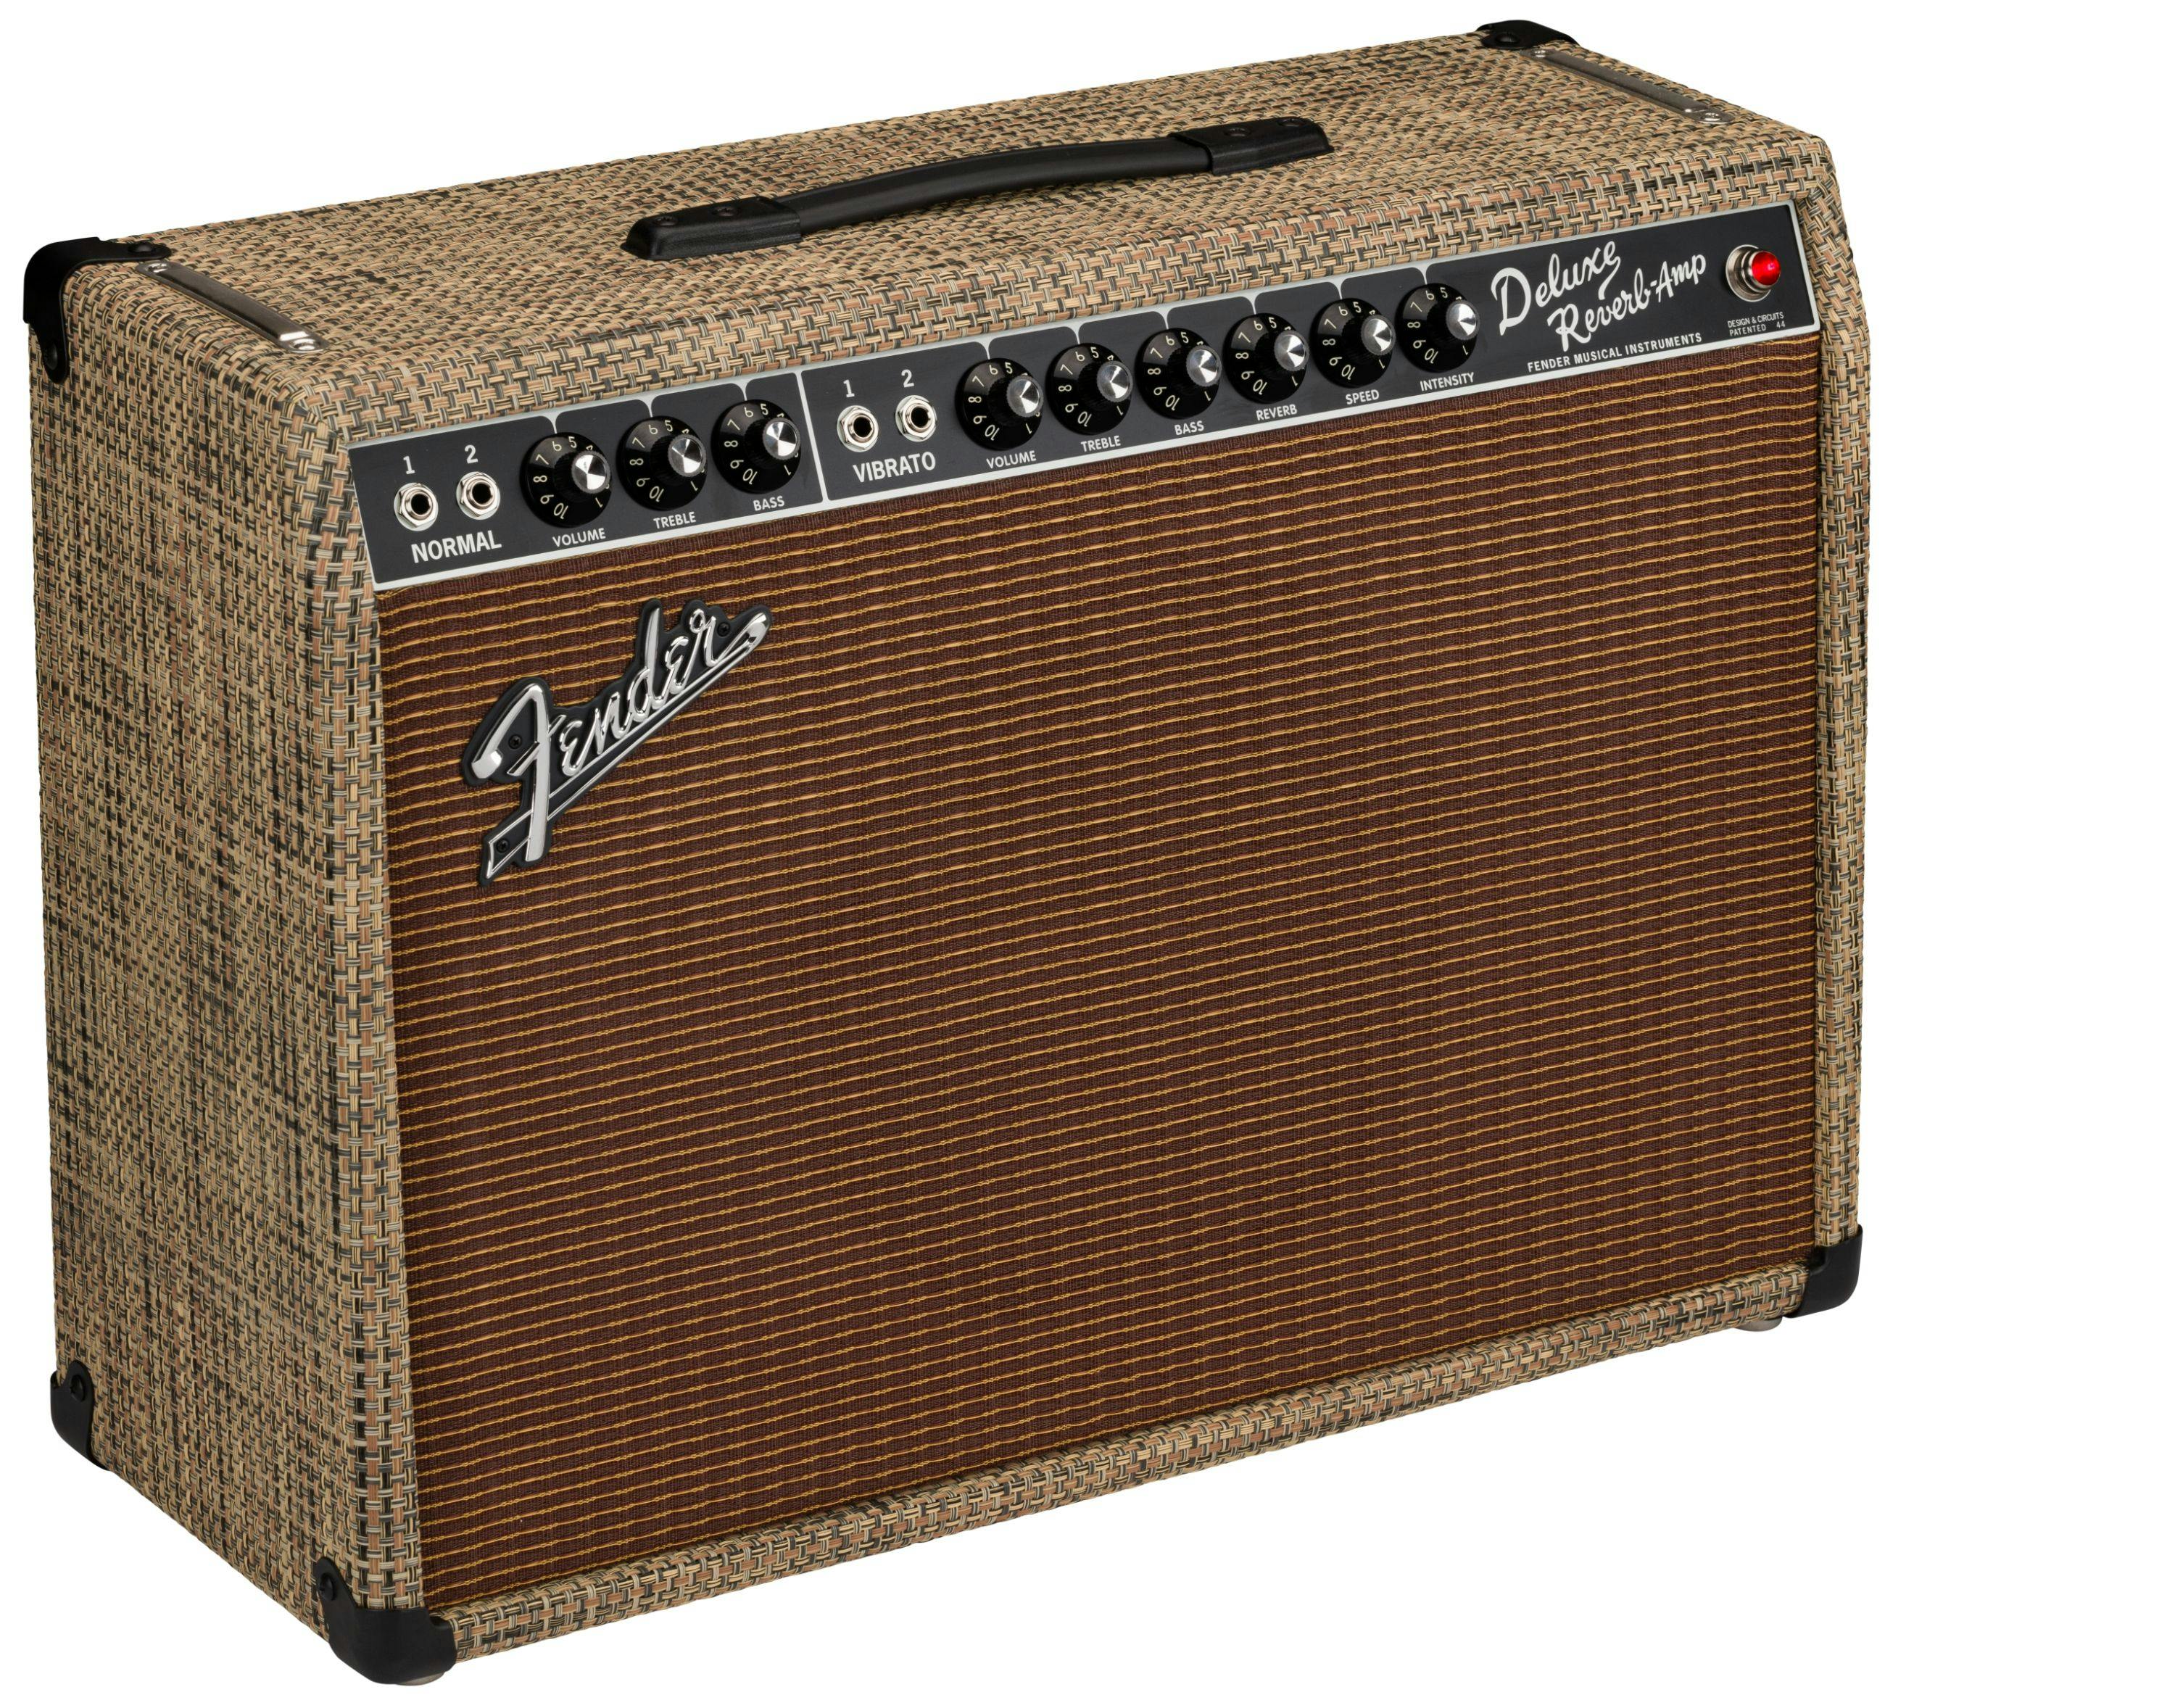 Fender Limited Edition '65 Deluxe Reverb in Chilewich Bark 